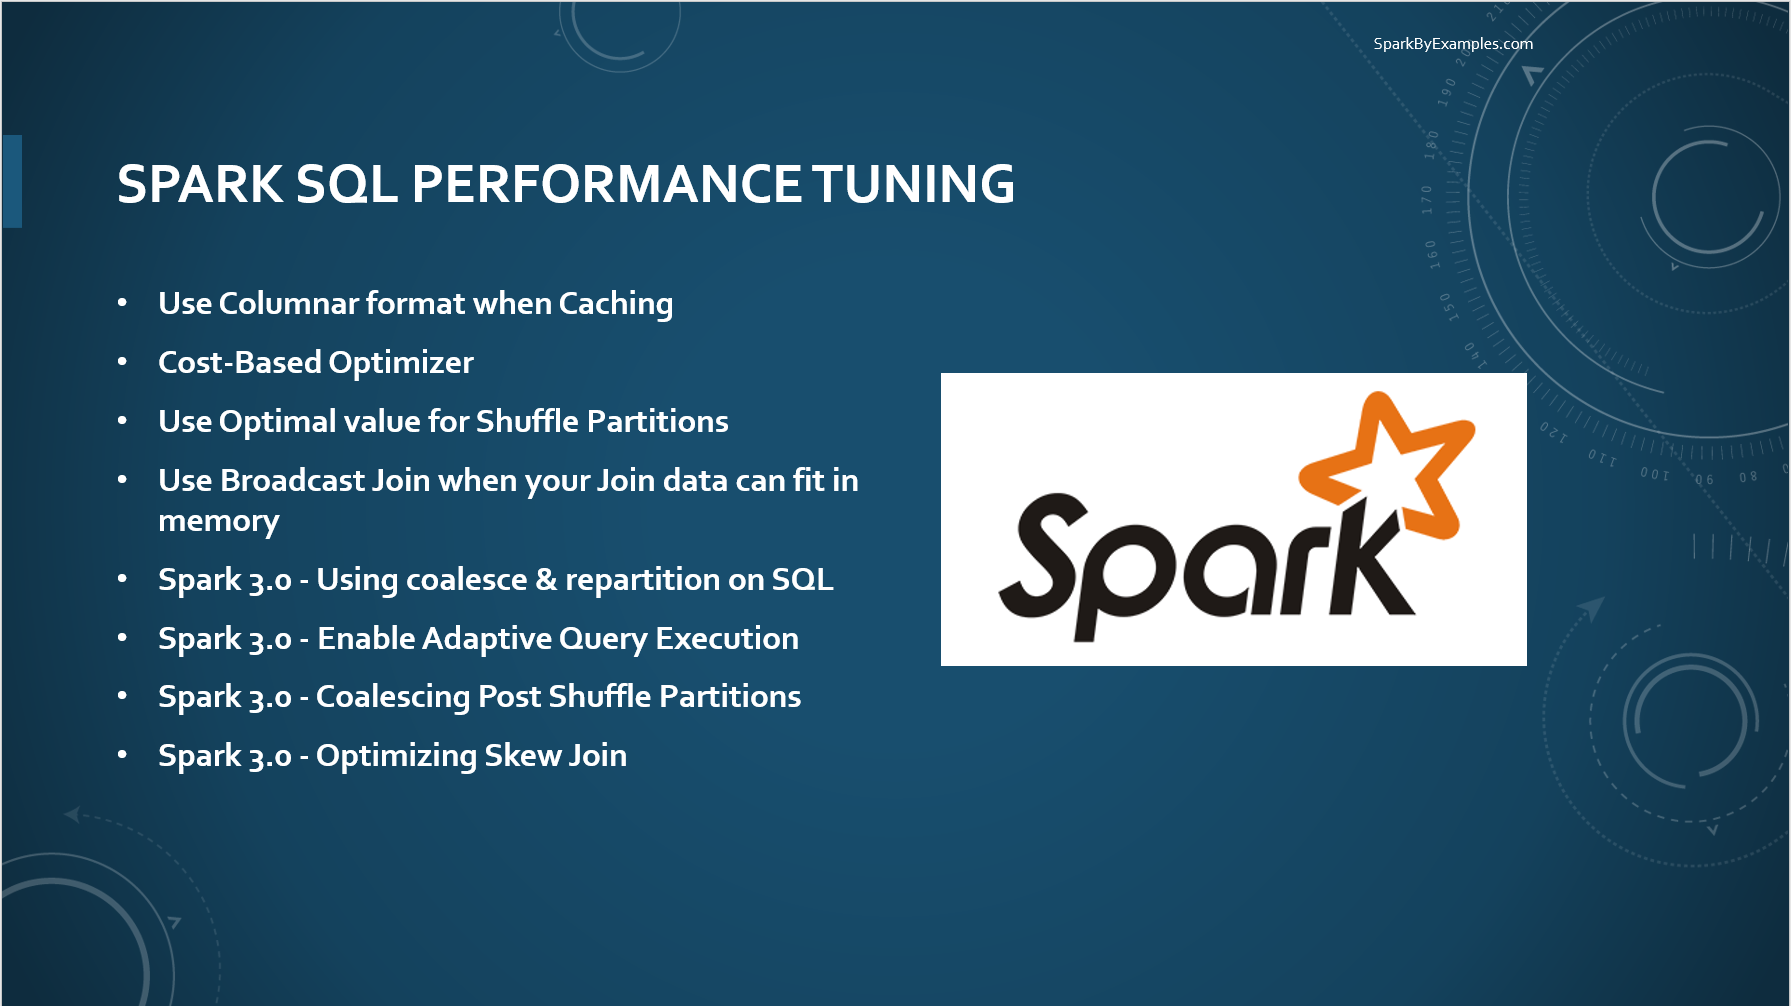 You are currently viewing Spark SQL Performance Tuning by Configurations